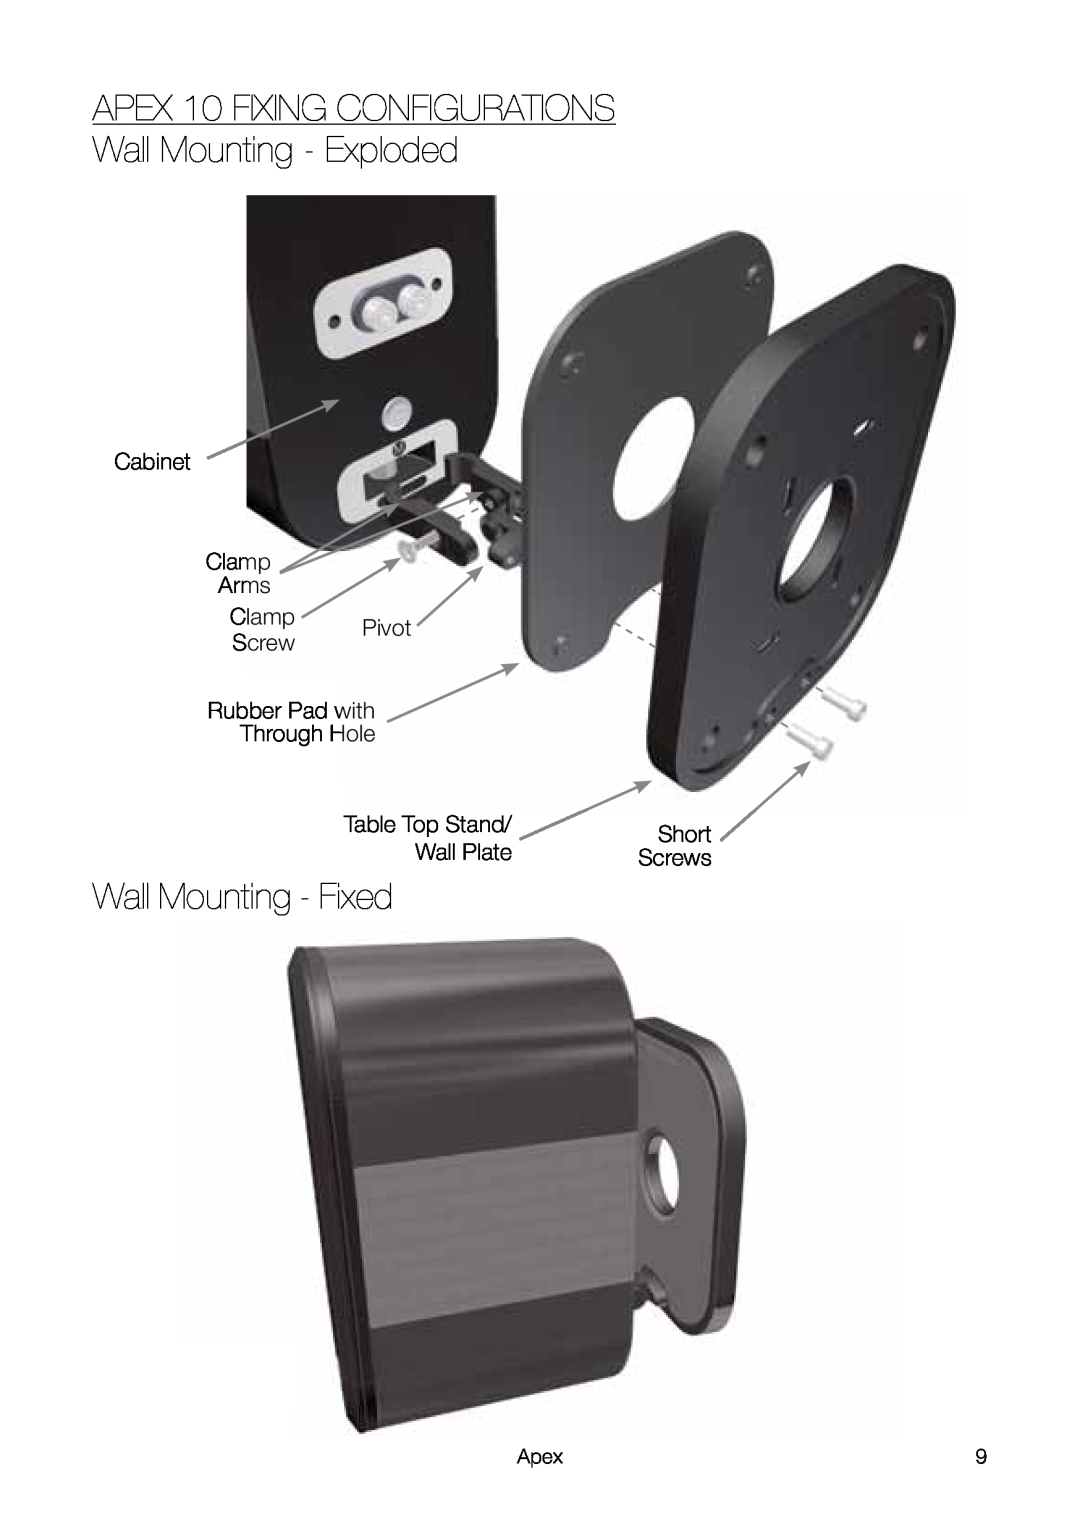 Apex Digital Apex 10 Fixing Configurations Wall Mounting - Exploded, Wall Mounting - Fixed, Short, Wall Plate 